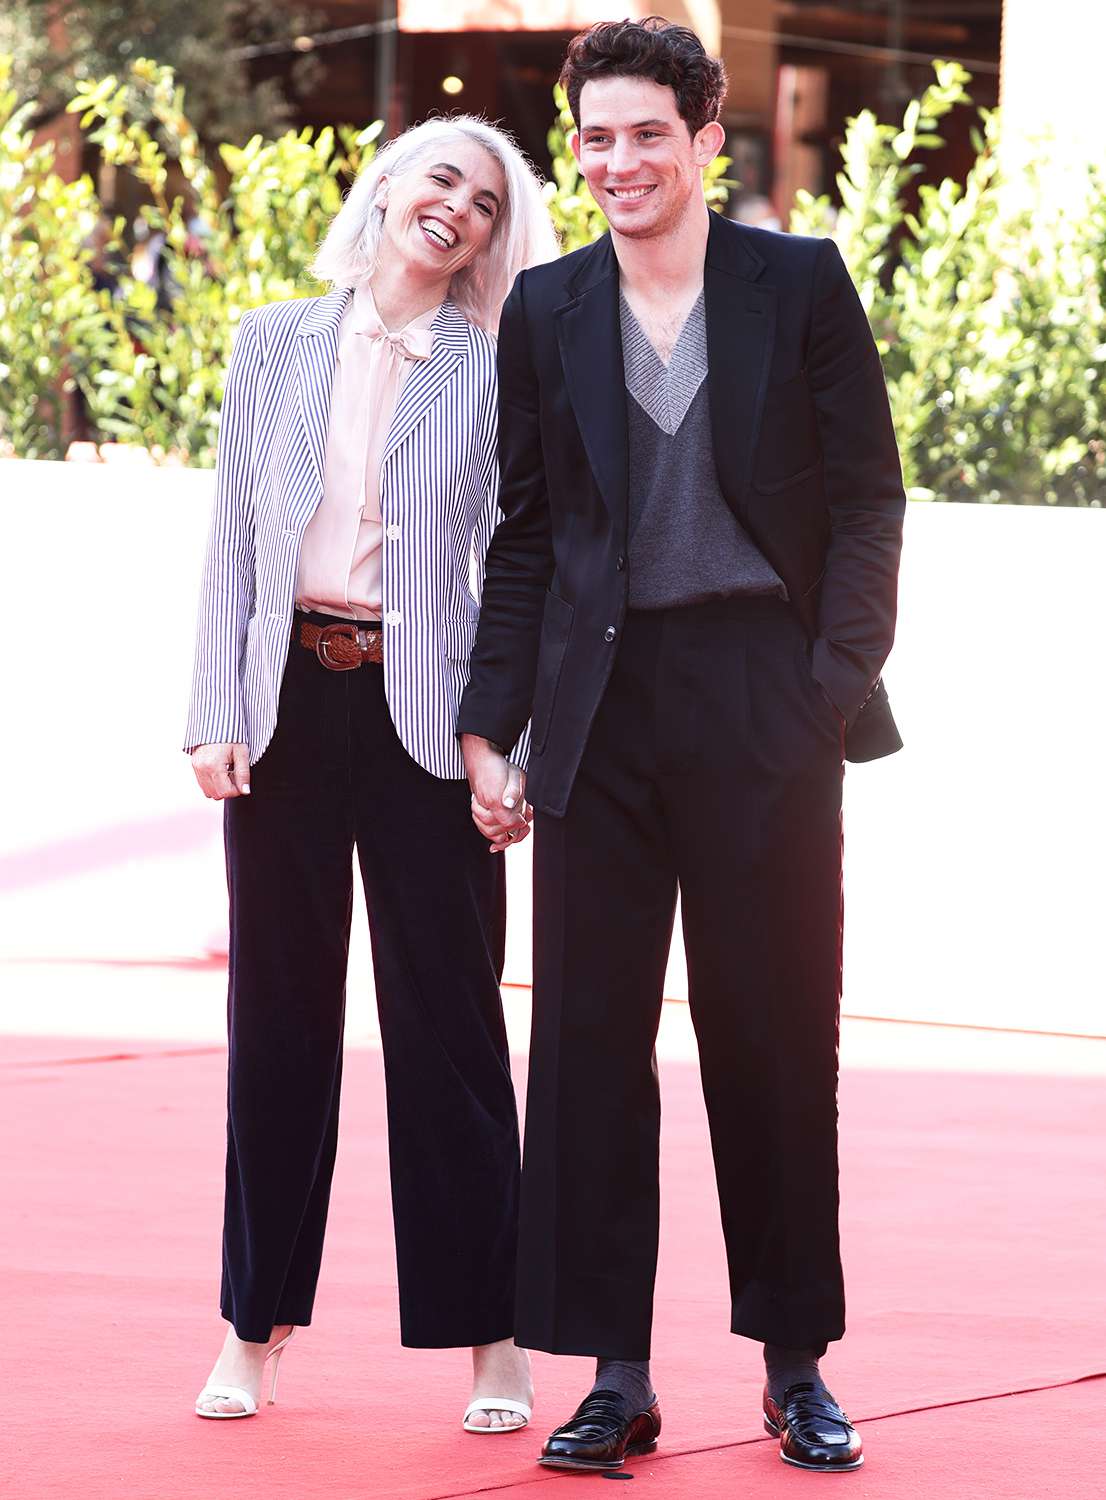 Director Eva Husson and Josh O'Connor attends the photocall of the movie "Mothering Sunday" during the 16th Rome Film Fest 2021 on October 17, 2021 in Rome, Italy.